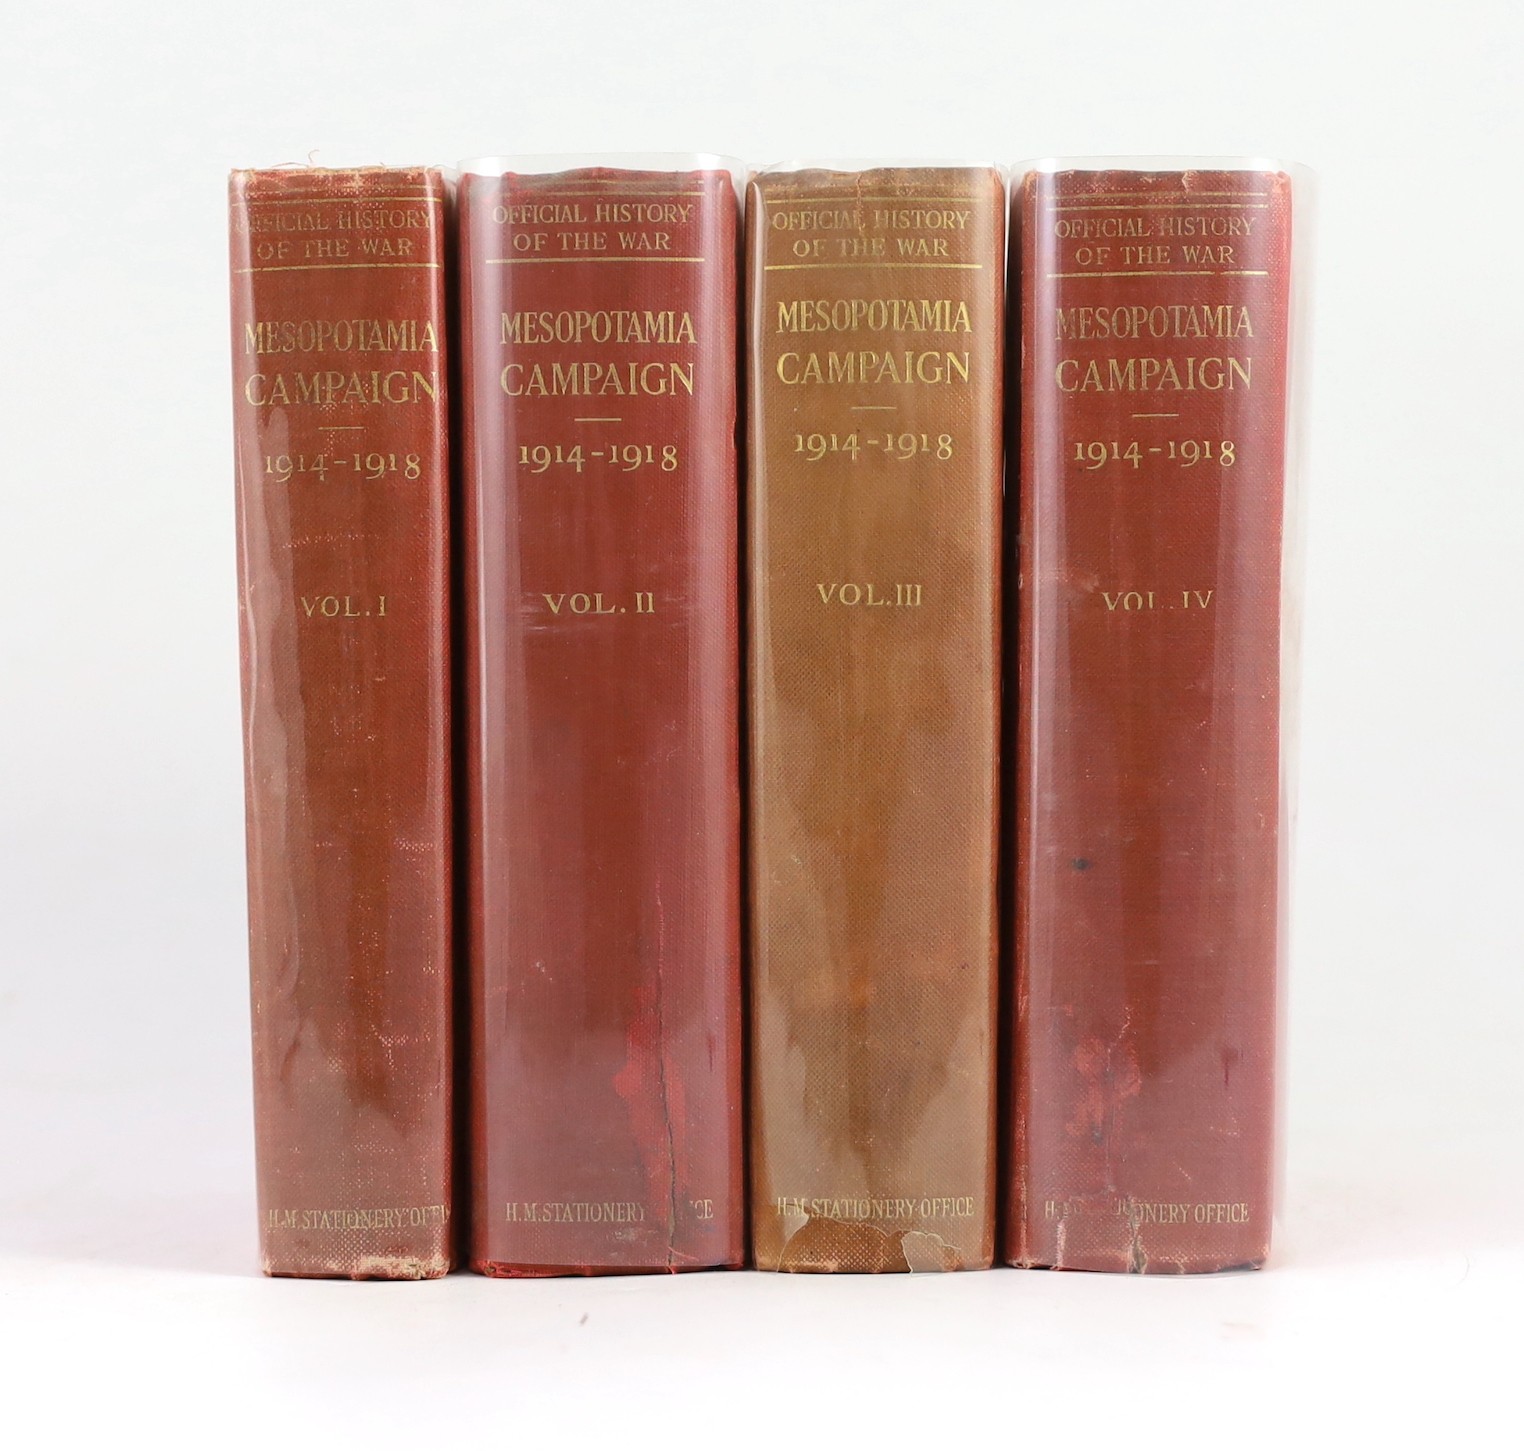 Moberly, Frederick James (Brig.-Gen.) - The Campaign in Mesopotamia, 1914-18, 4 vols, 8vo, original red cloth gilt, with 39 maps in pockets at rear, HMSO, London, 1923-27